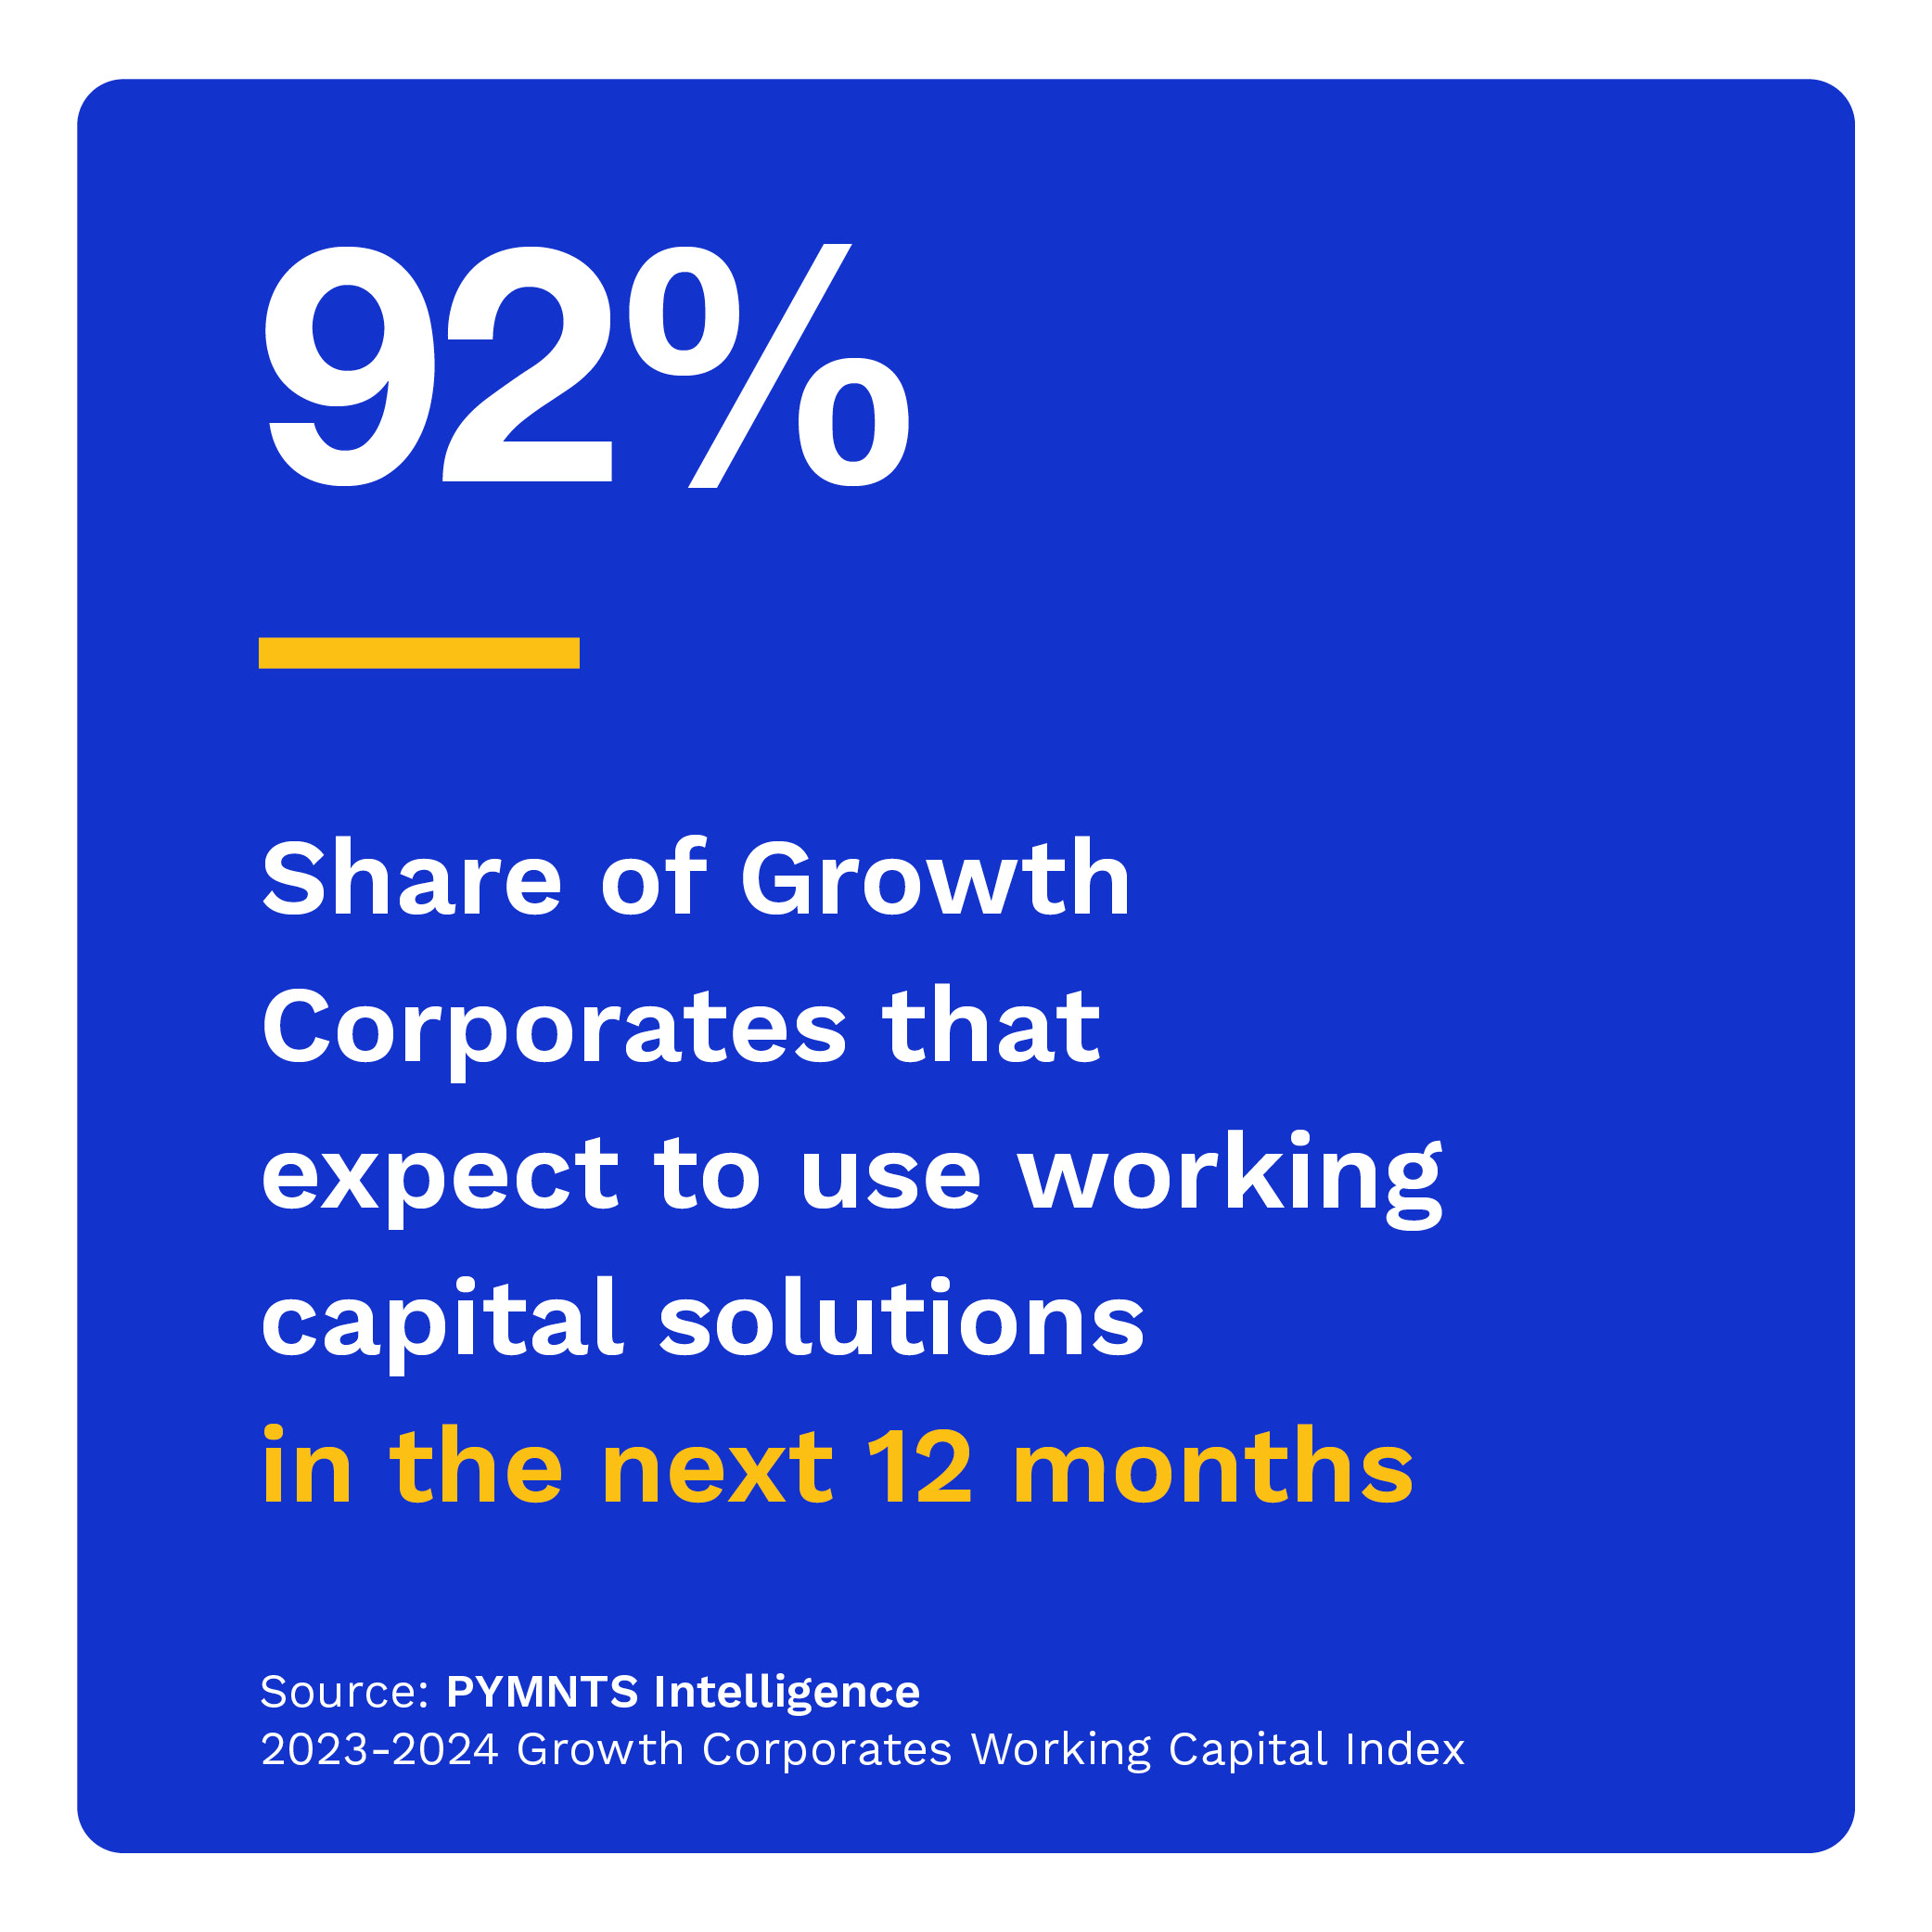 92%: Share of Growth Corporates that expect to use working capital solutions in the next 12 months